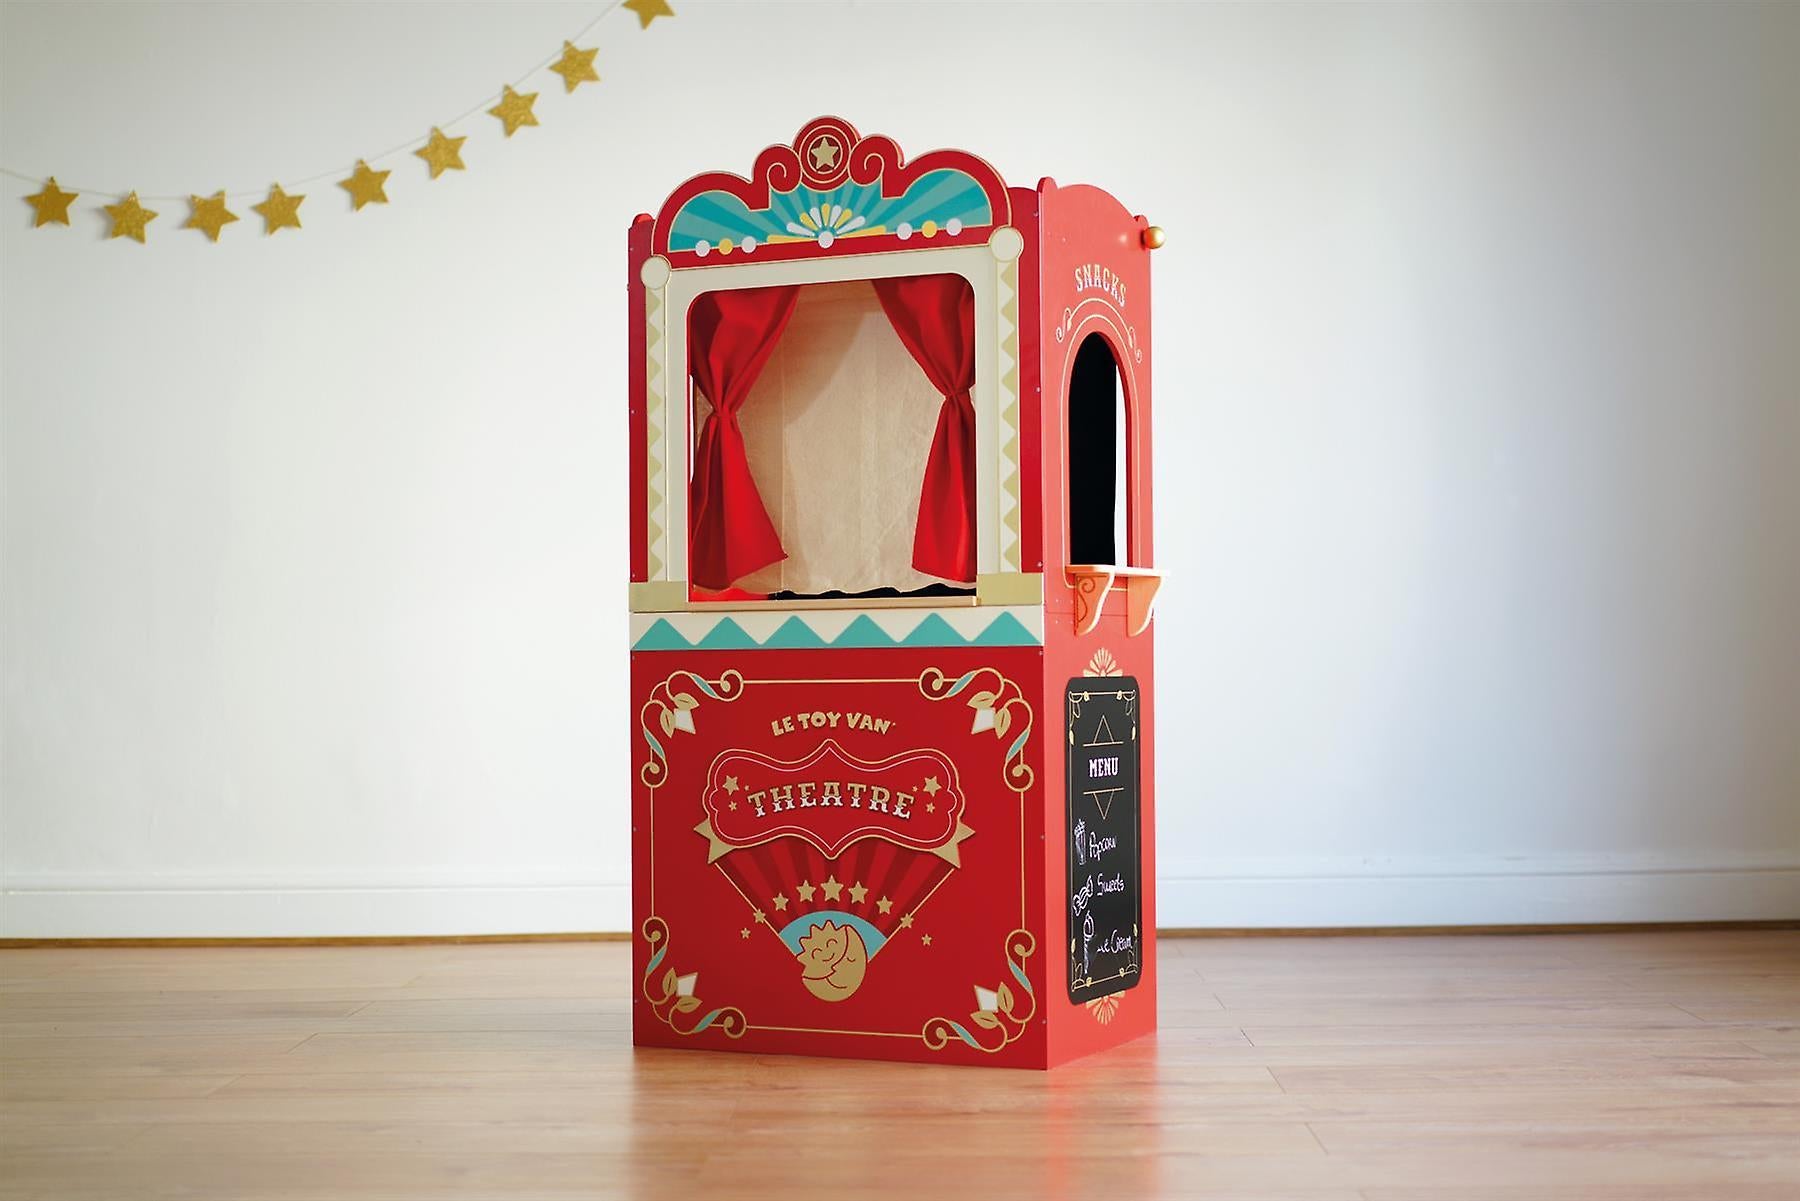 Playtime Puppet Theatre - Tricia Lowenfield Design